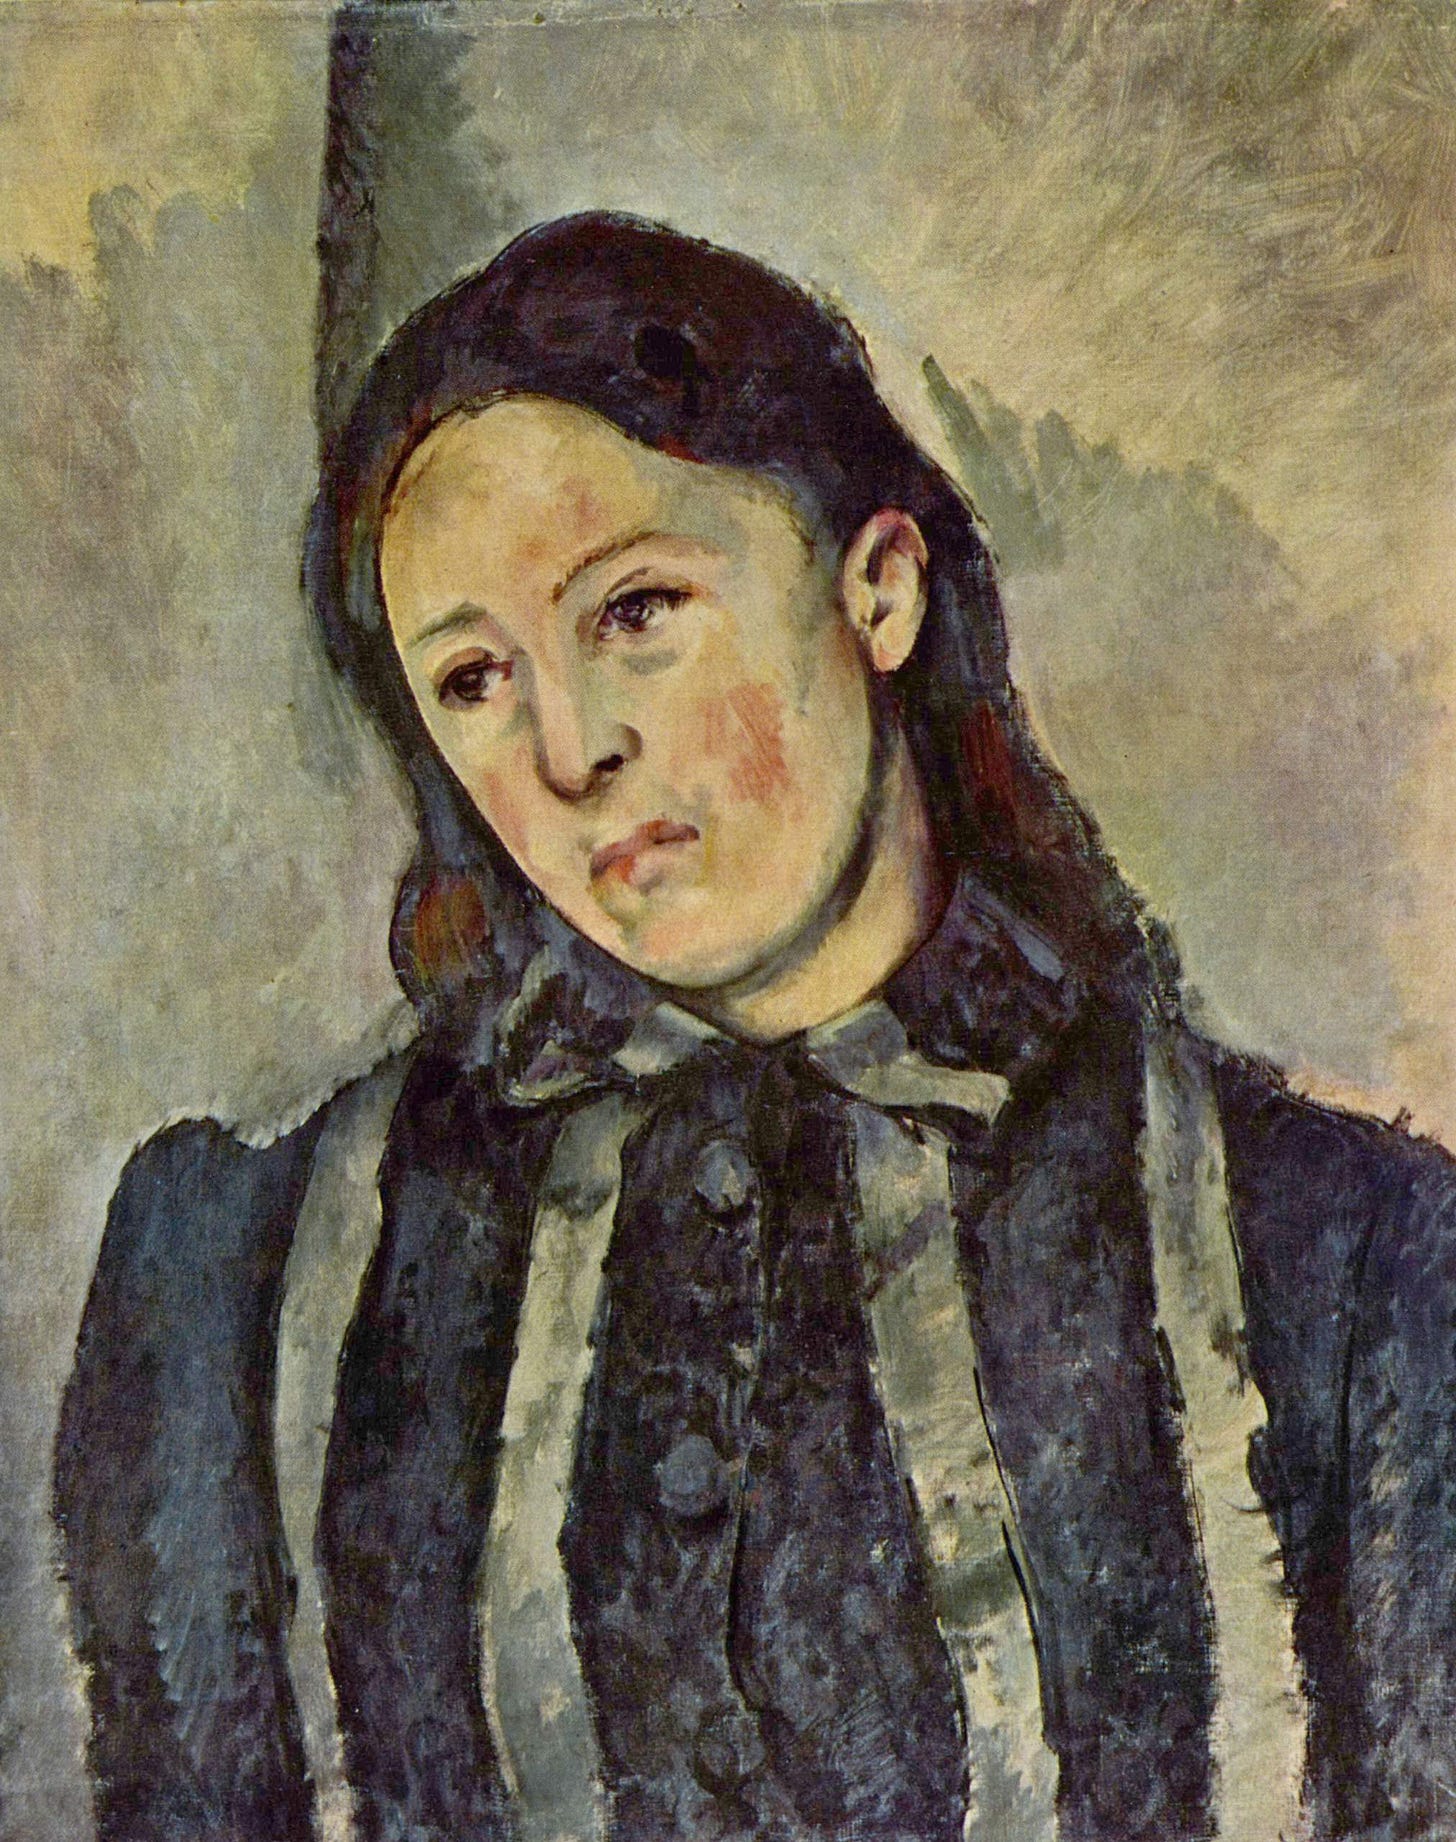 Portrait of Madame Cézanne with Loosened Hair - Wikipedia